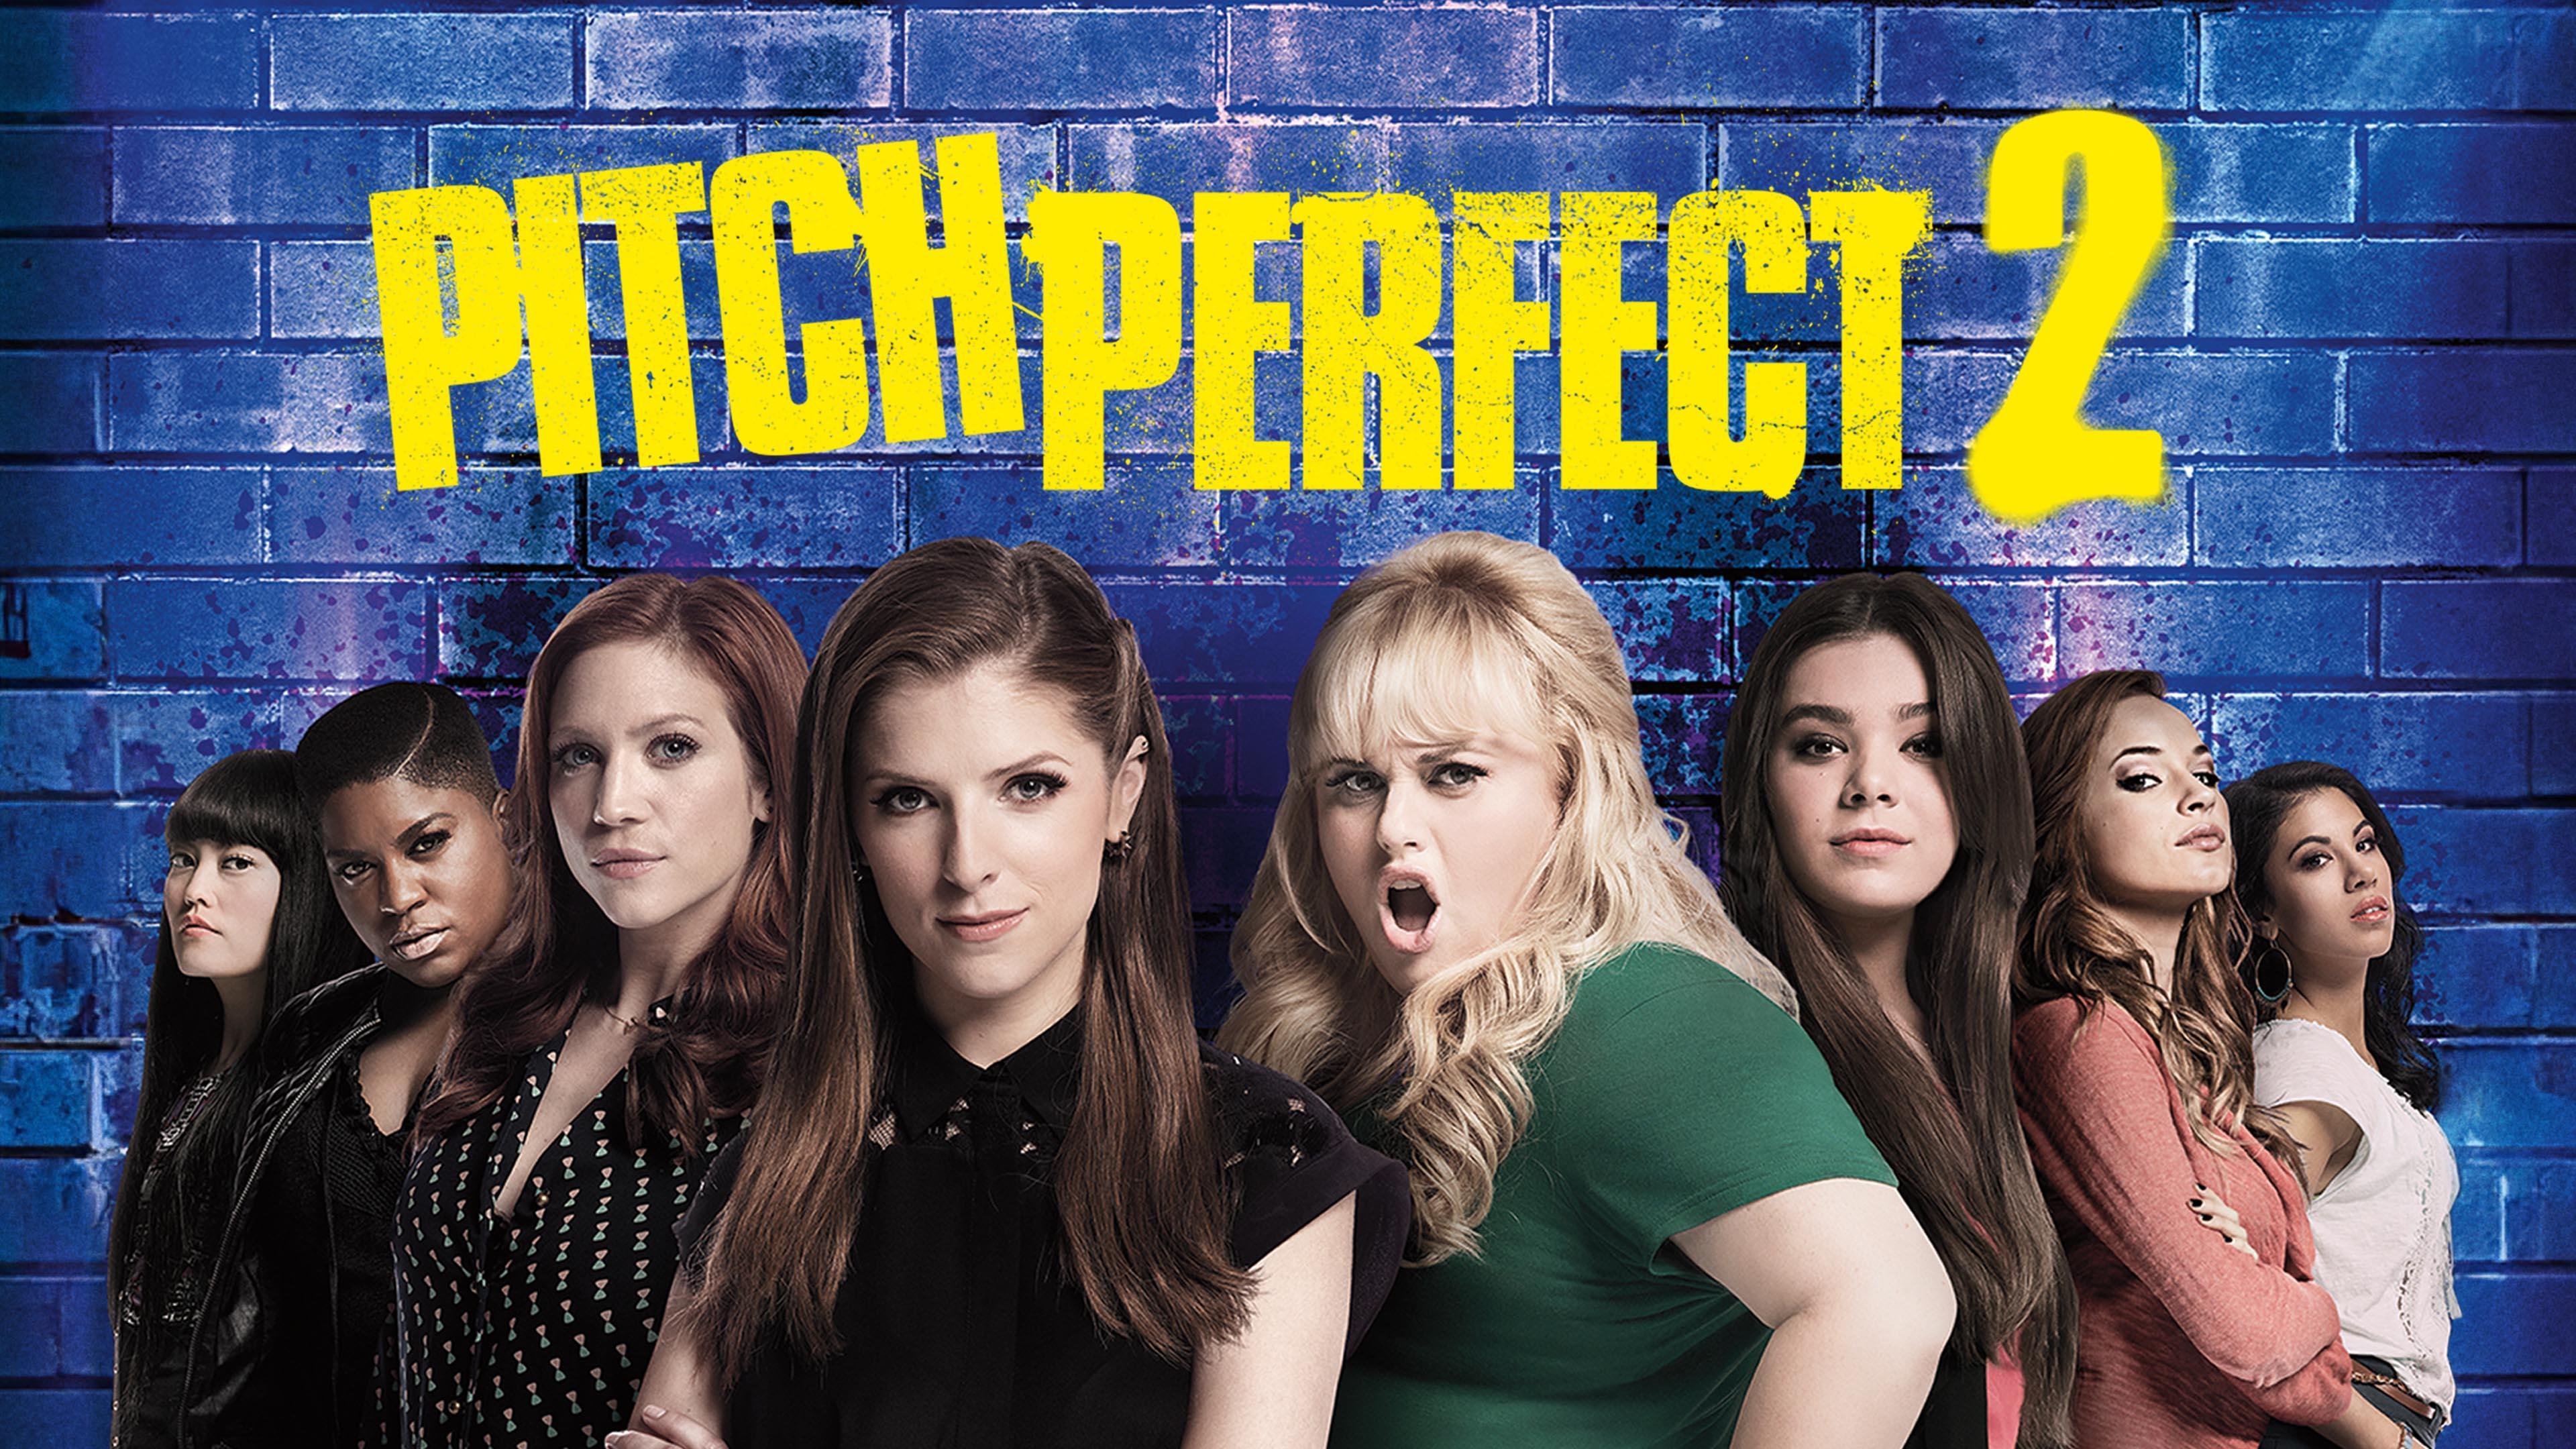 YARN, and pretend to be surprised, Pitch Perfect 2